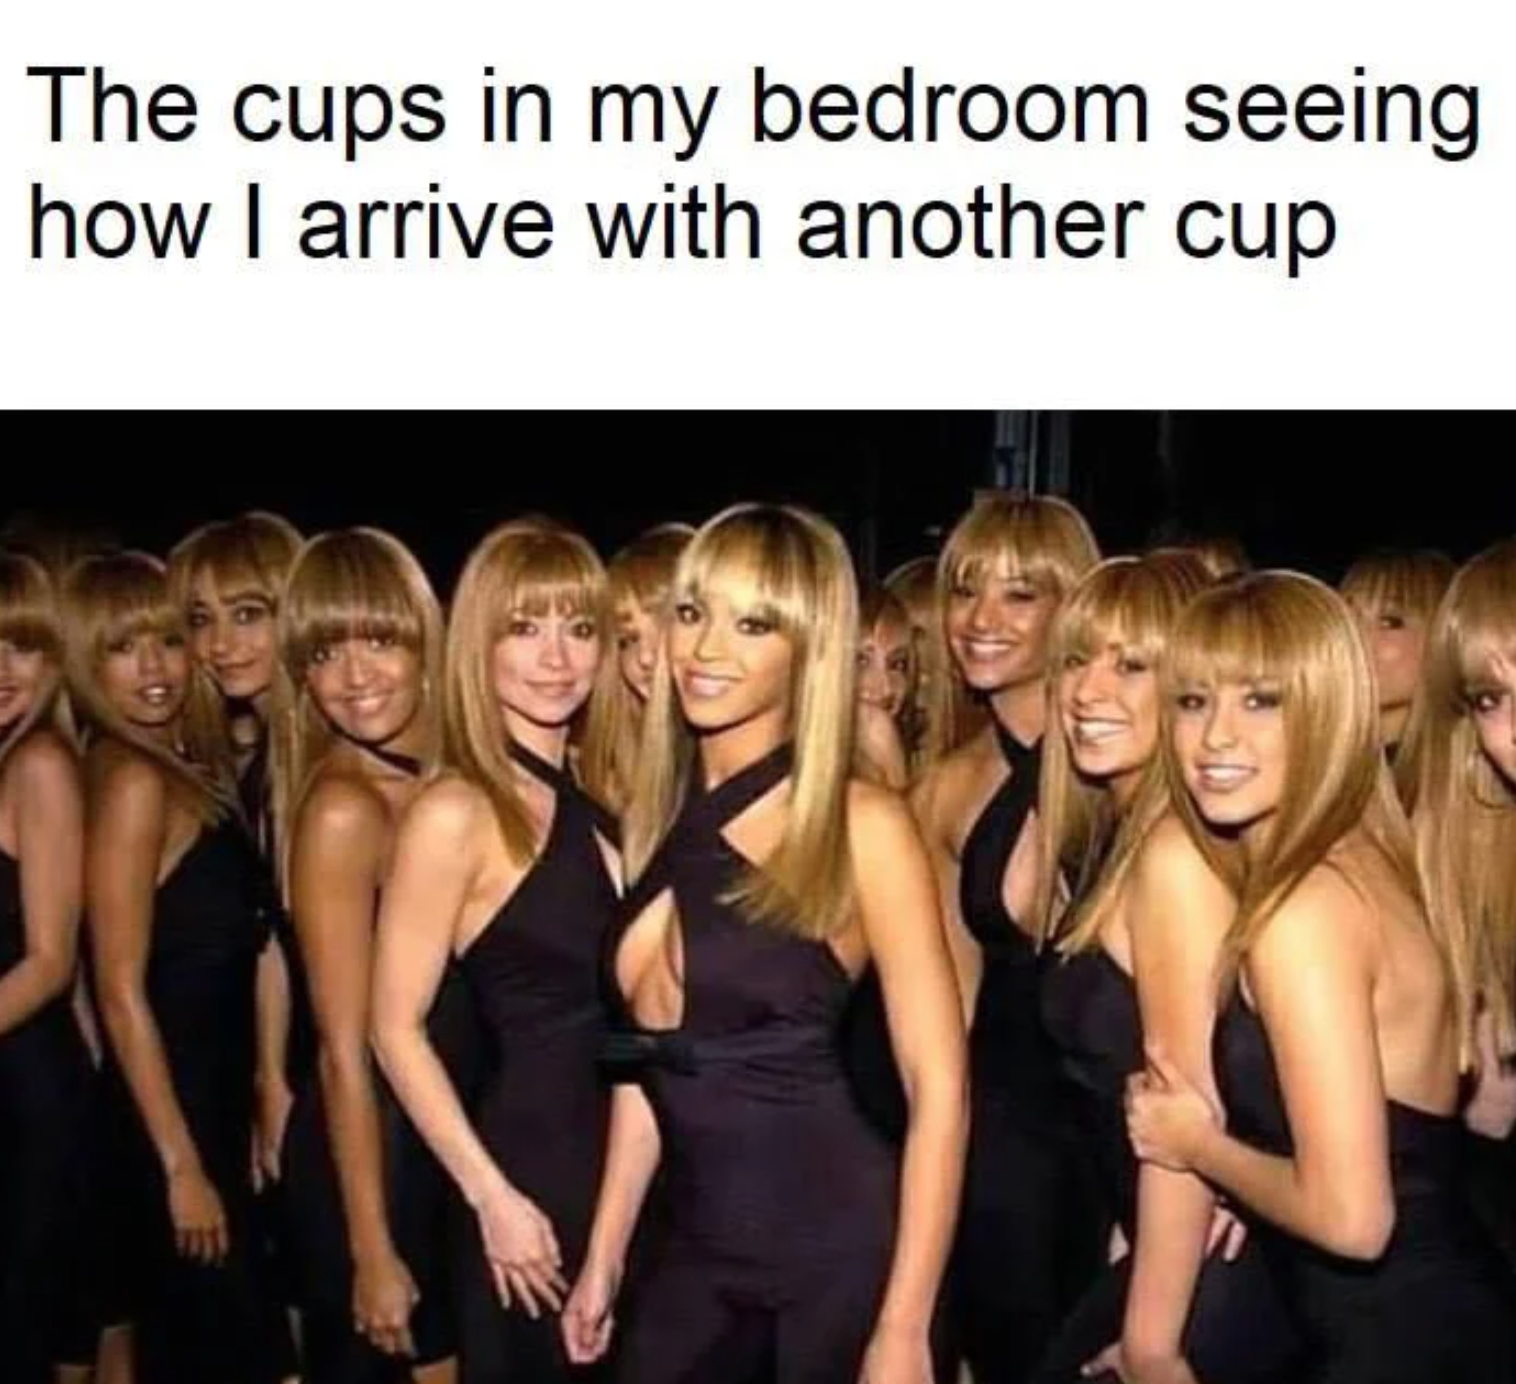 beyonce cup meme - The cups in my bedroom seeing how I arrive with another cup